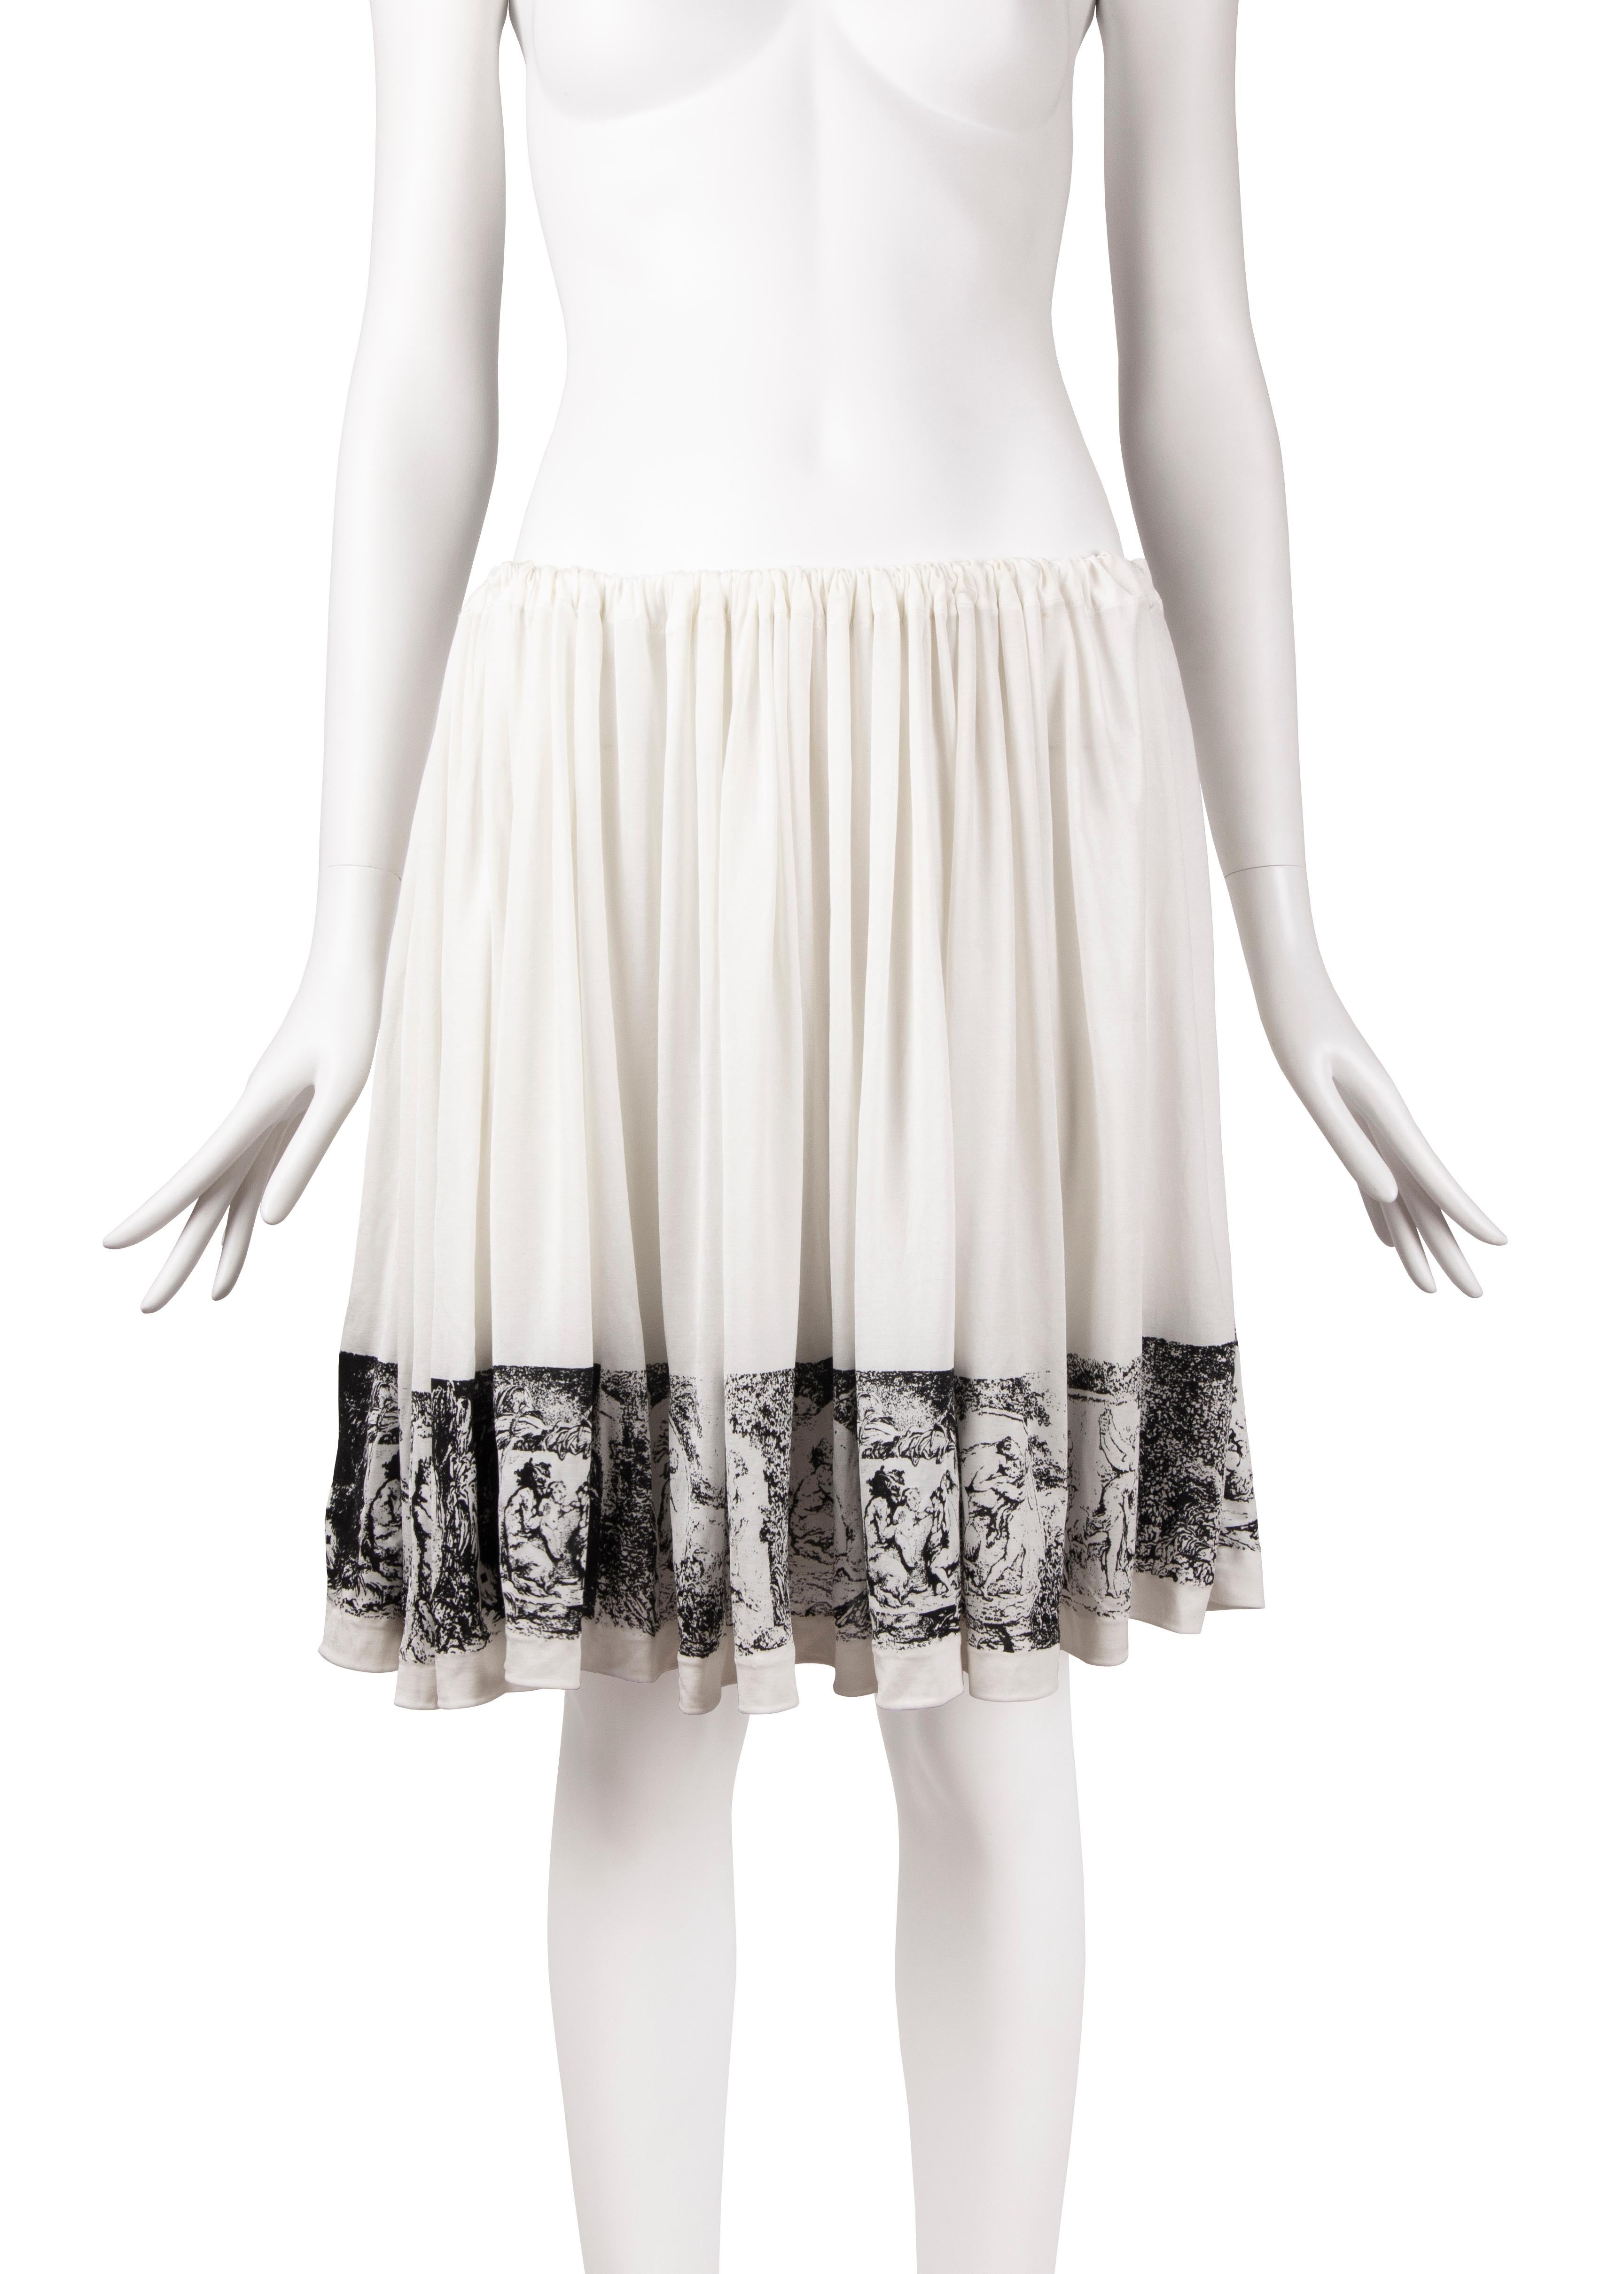 A Vivienne Westwood ‘’Pagan” bustle skirt, Spring-Summer 1988. Made from a slinky off-white acetate fabric, this skirt features a draw- string waist that creates natural pleats, adding to its fluid silhouette. The garment is versatile with circular